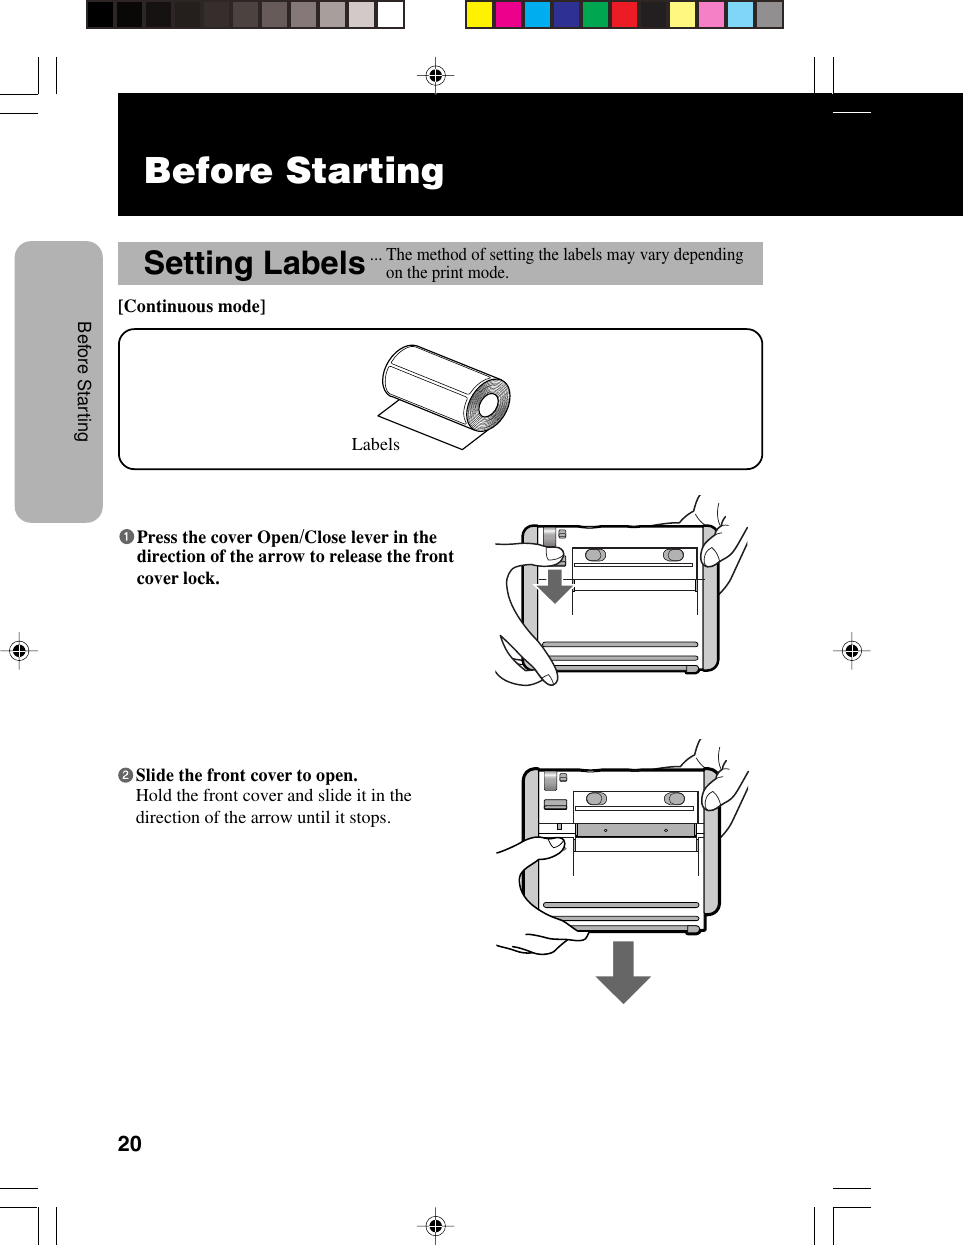 20Before StartingBefore StartingSetting Labels[Continuous mode]... The method of setting the labels may vary dependingon the print mode.LabelsPress the cover Open/Close lever in thedirection of the arrow to release the frontcover lock.Slide the front cover to open.Hold the front cover and slide it in thedirection of the arrow until it stops.